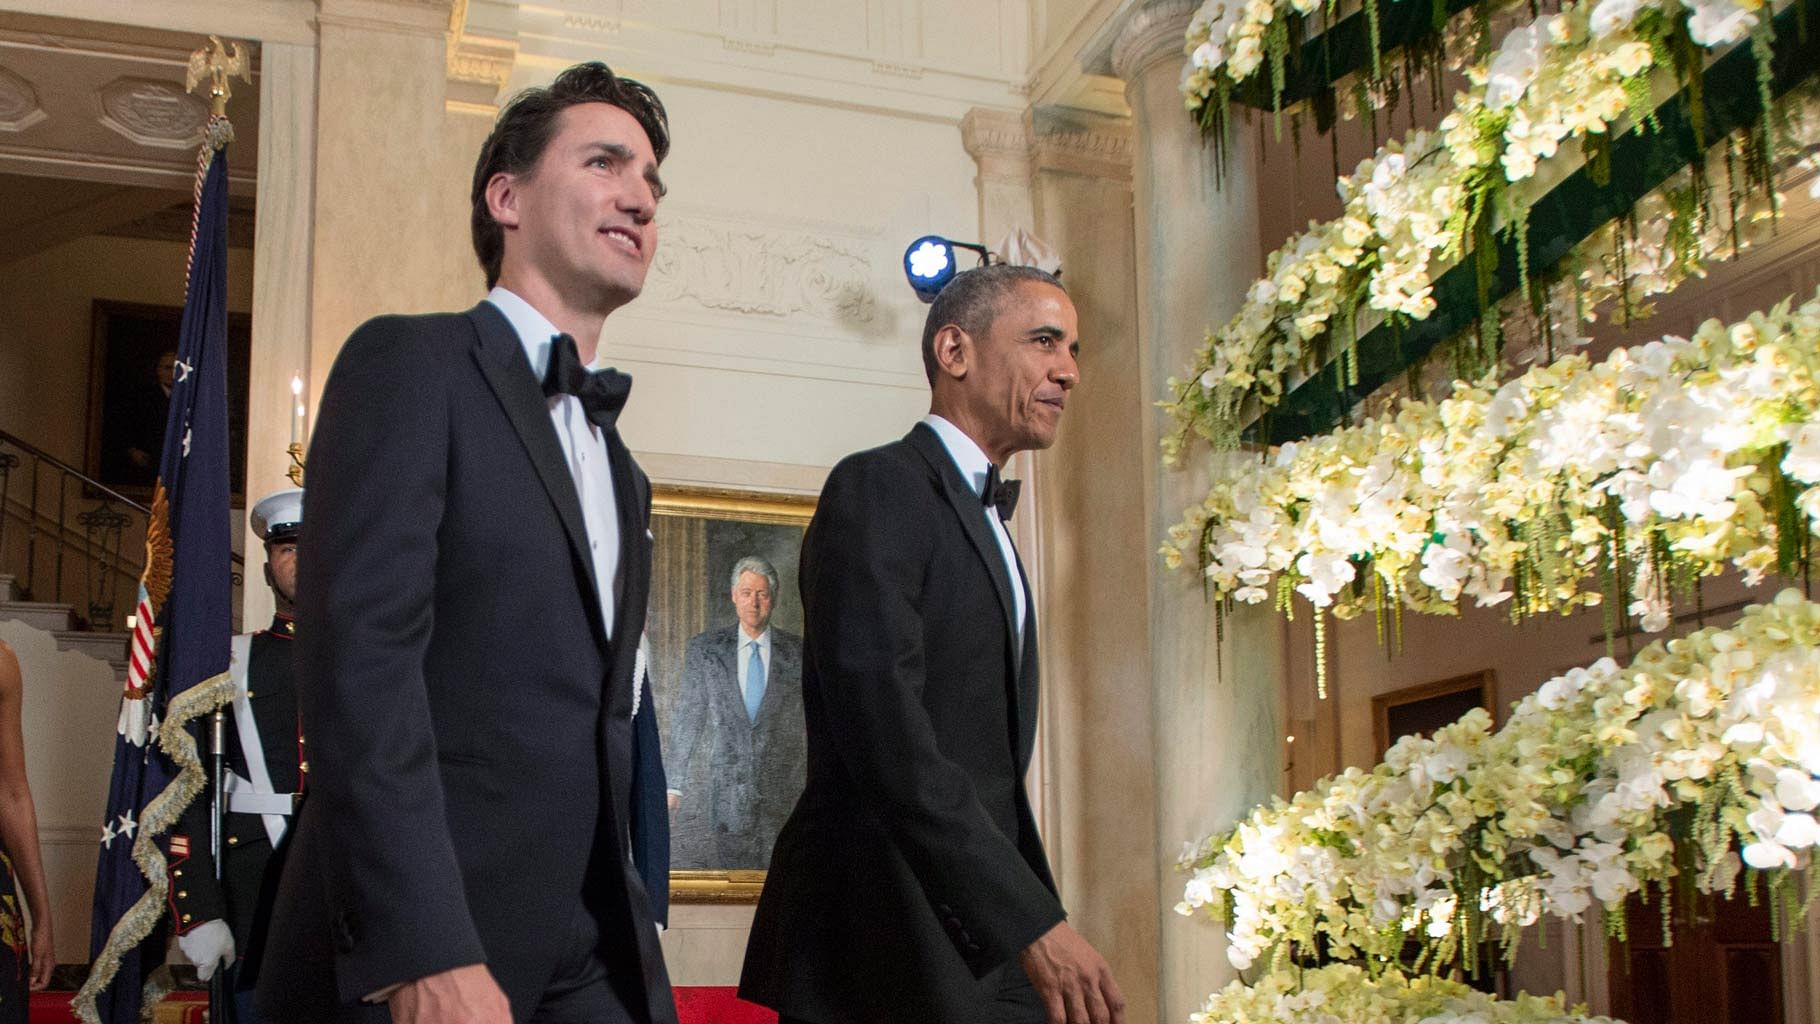 President Barack Obama (right) and Canadian Prime Minister Justin Trudeau walk into the White House in Washington, Thursday, 10 March 2016. (Photo: AP)